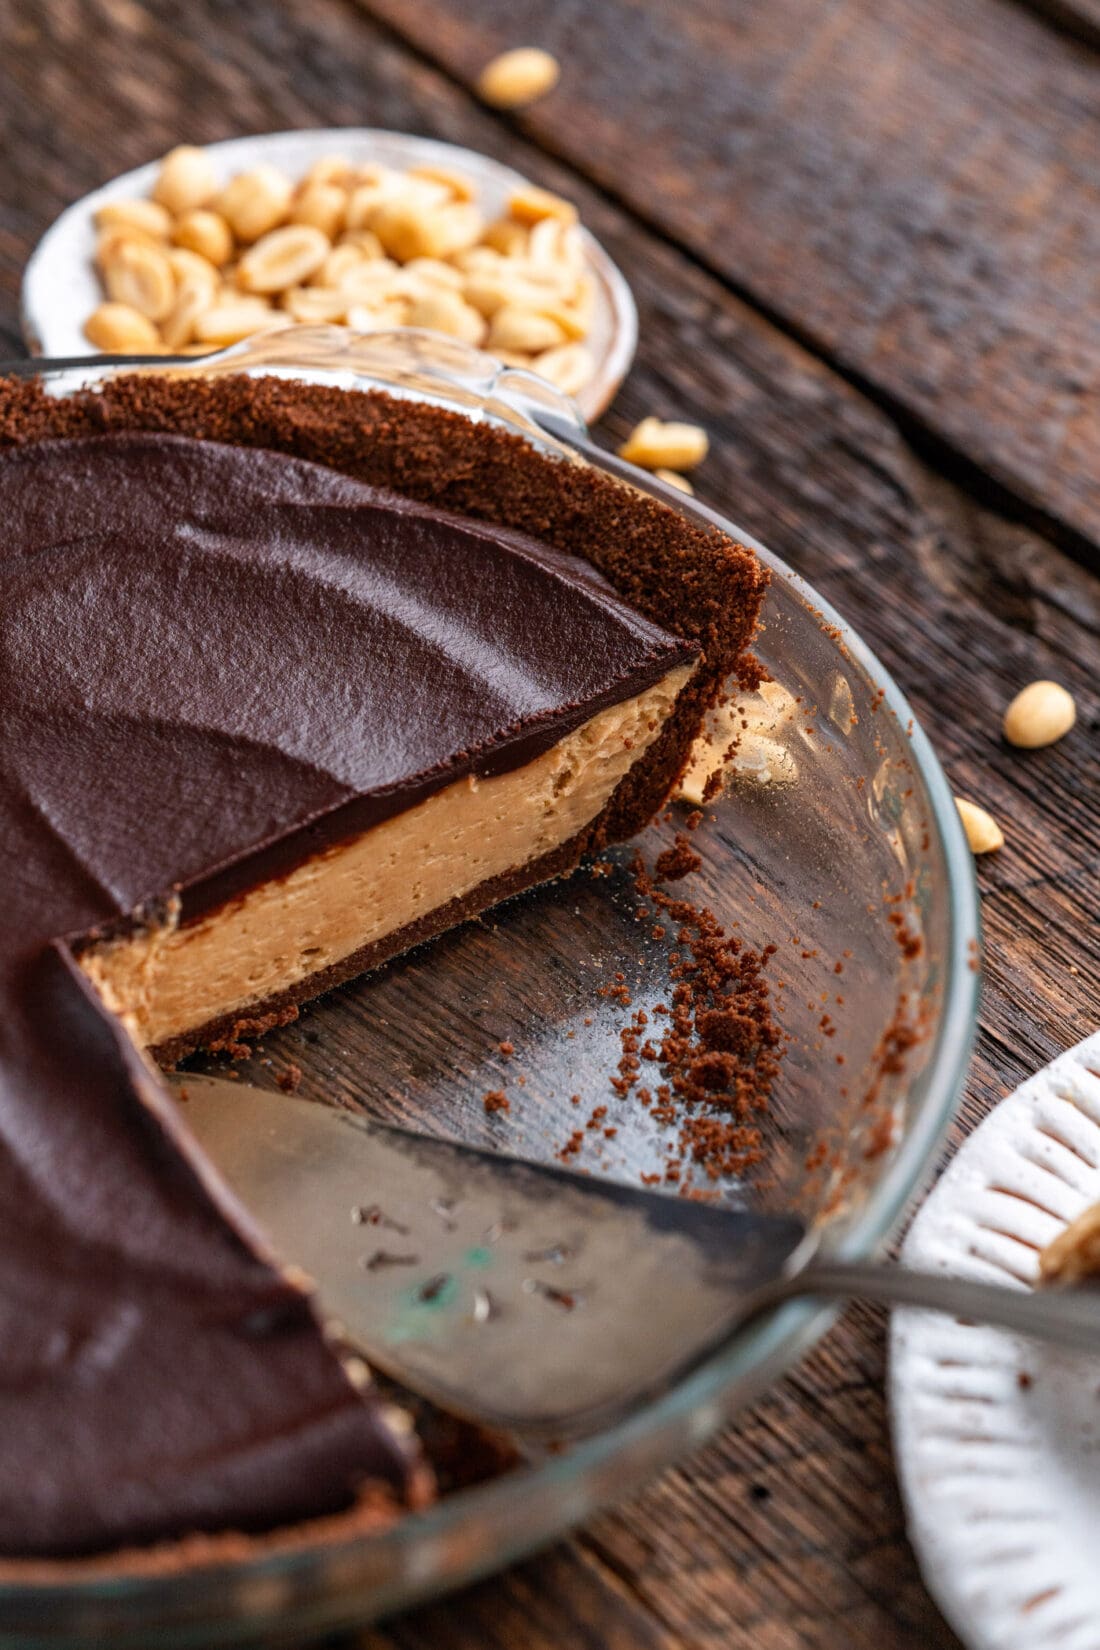 Chocolate Peanut Butter Pie with slices removed